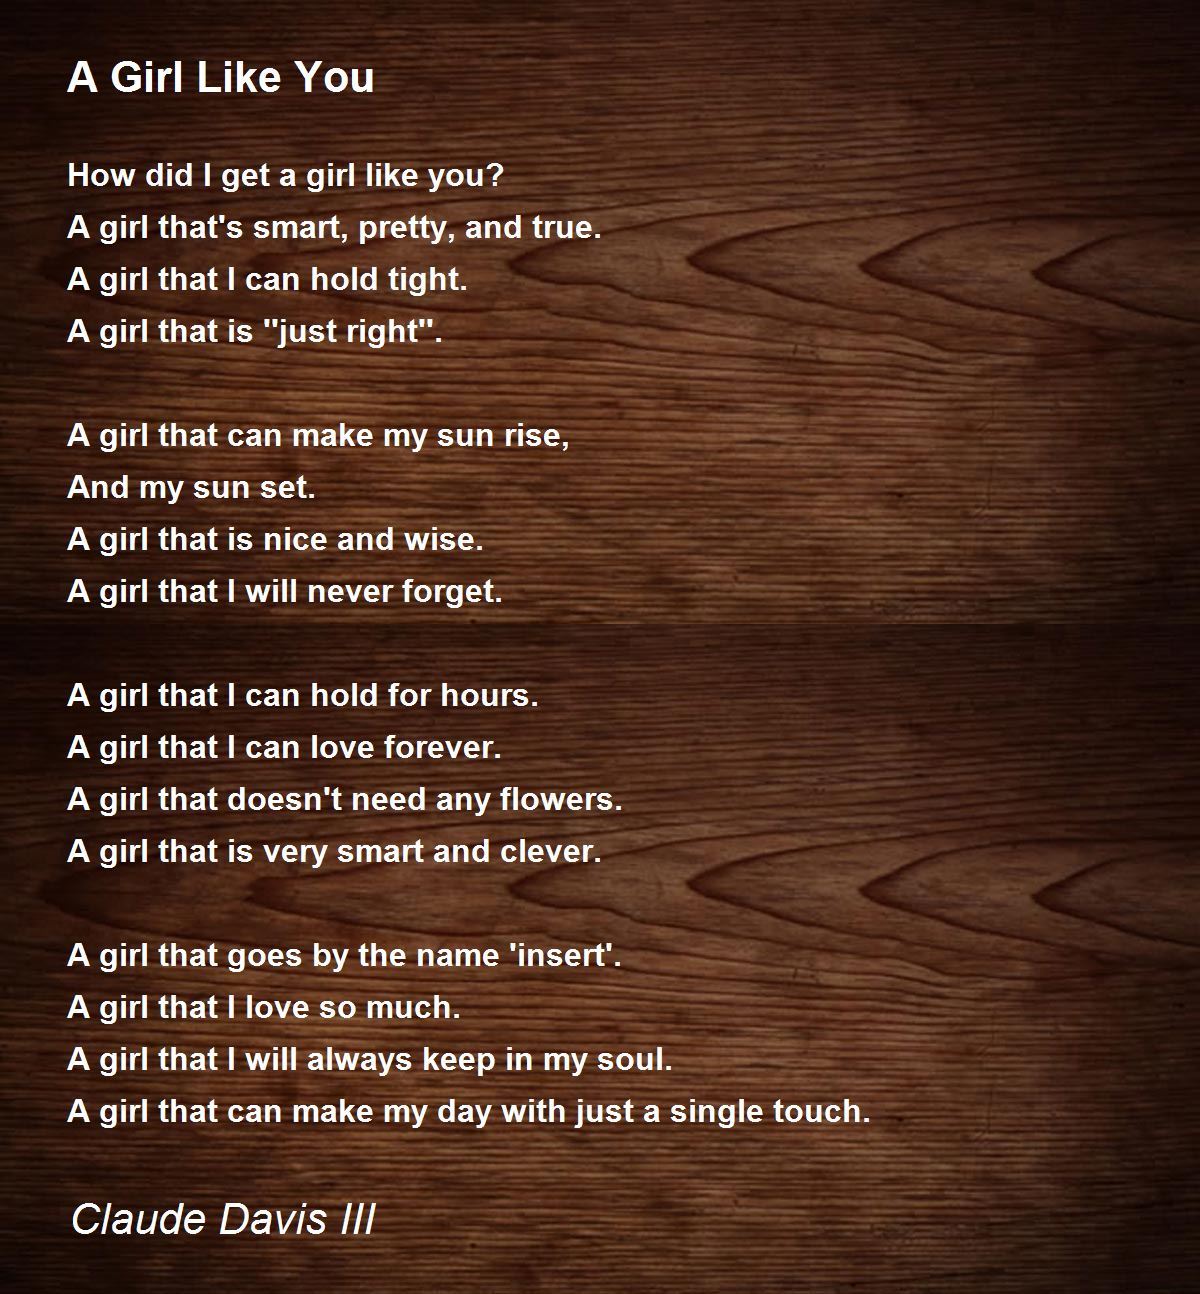 cute poems for girls you like